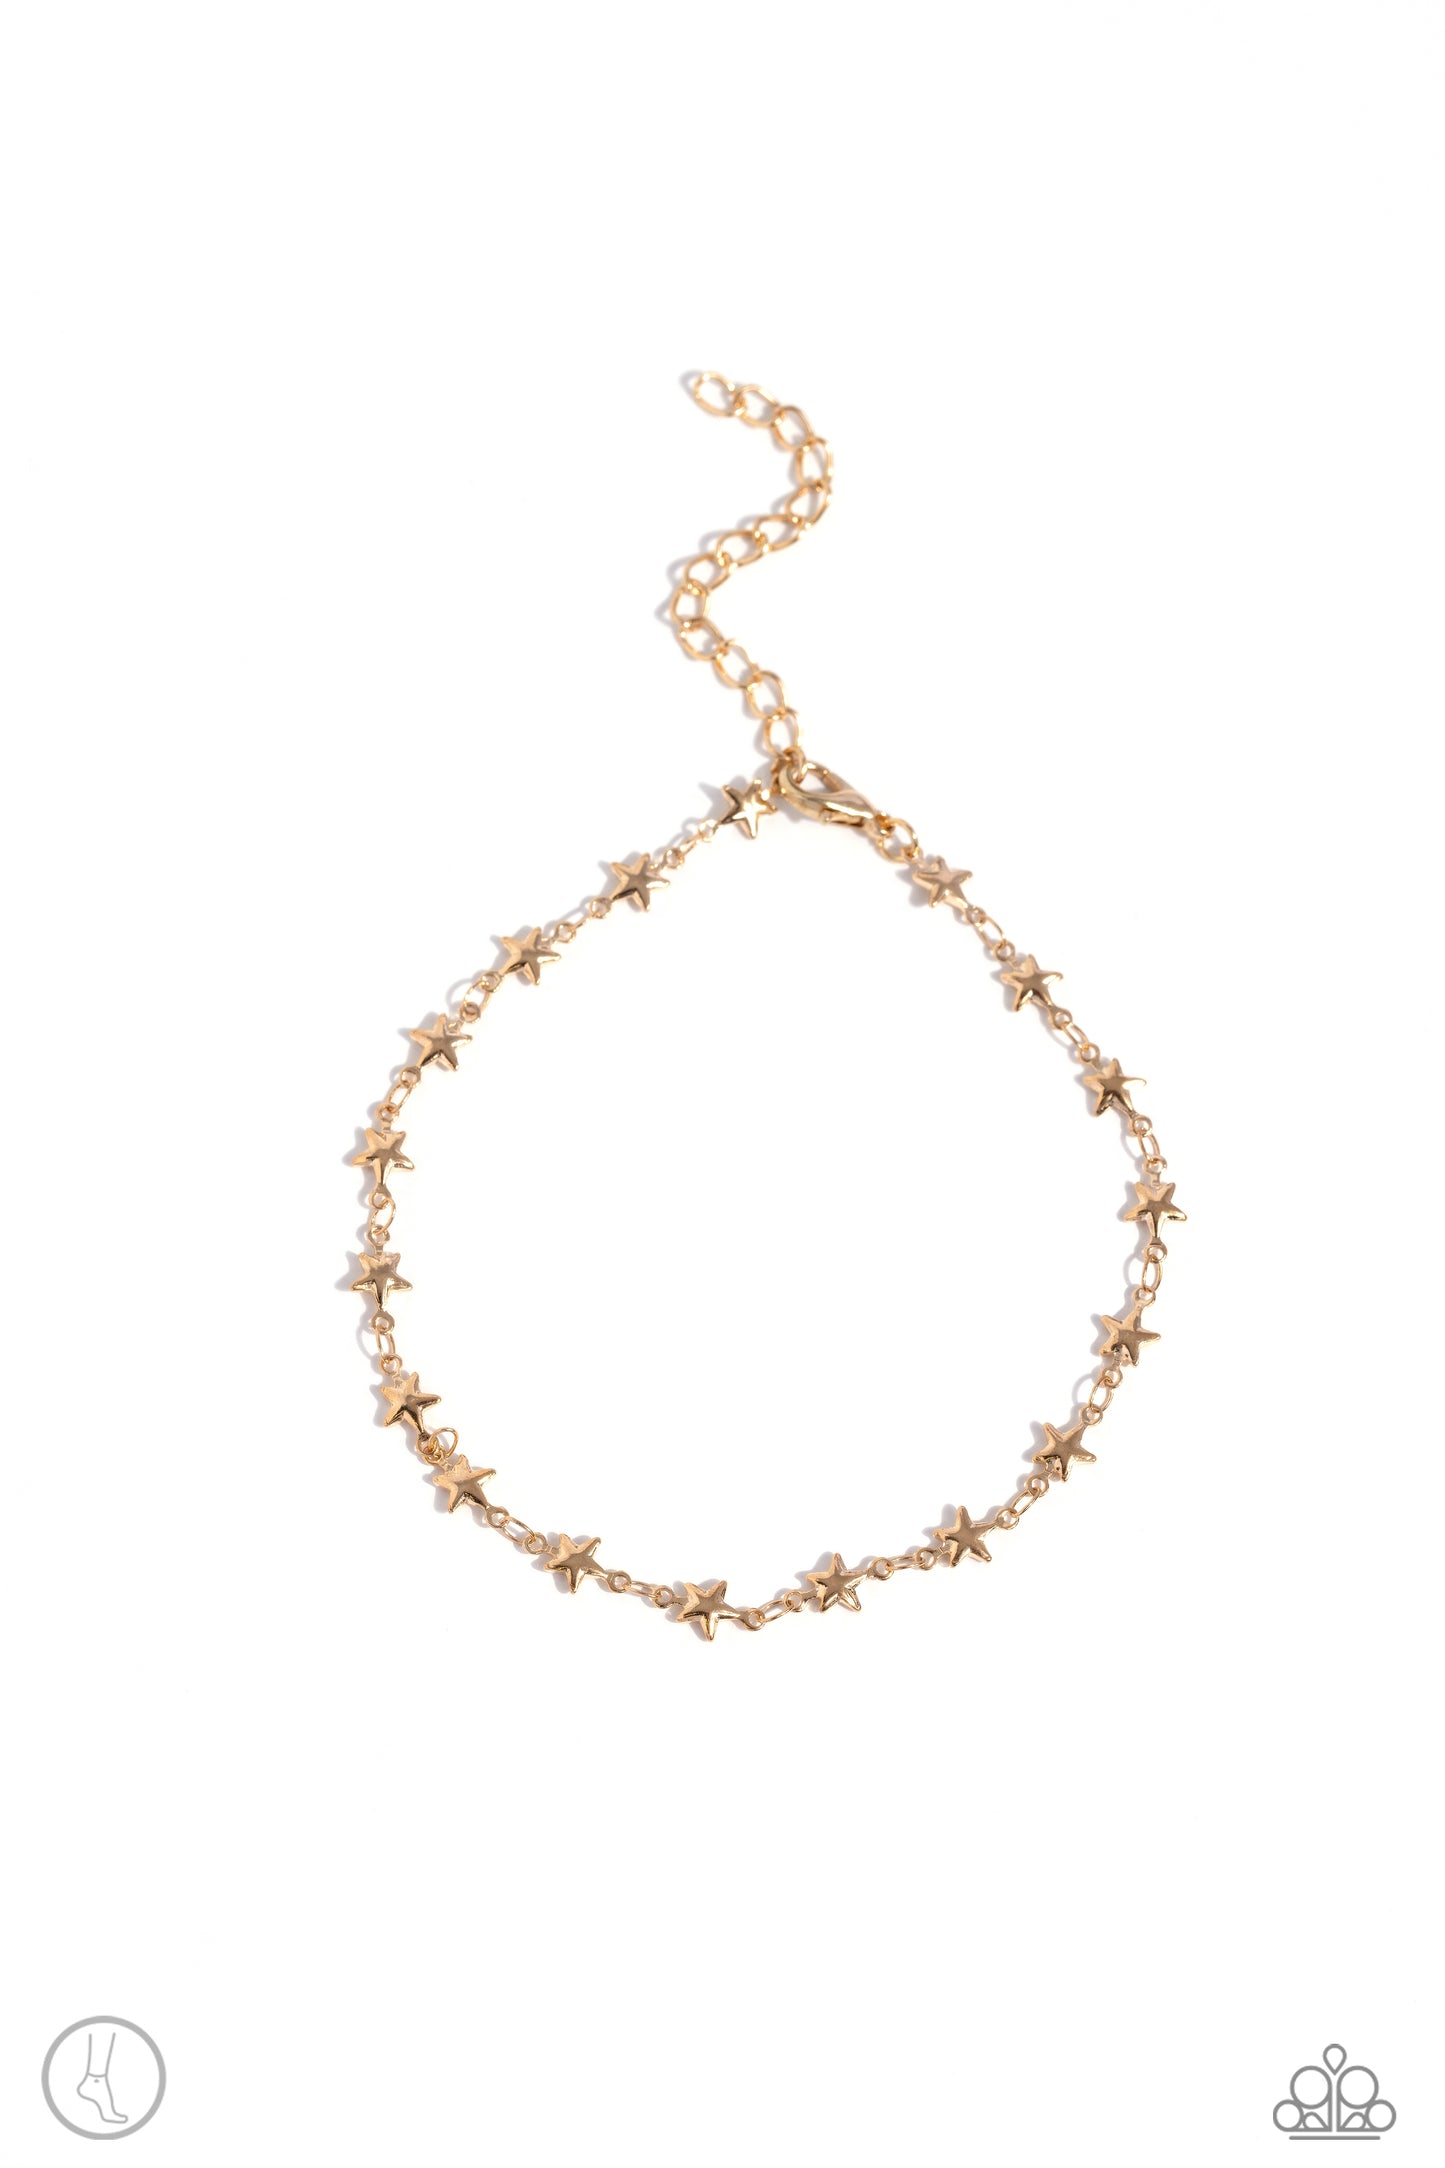 <p>Paparazzi Accessories - Starry Swing Dance - Gold Anklet dainty gold stars are infused along a classic gold chain around the ankle for a simply stellar statement. Features an adjustable clasp closure.</p> <p><i>Sold as one individual anklet.</i></p>